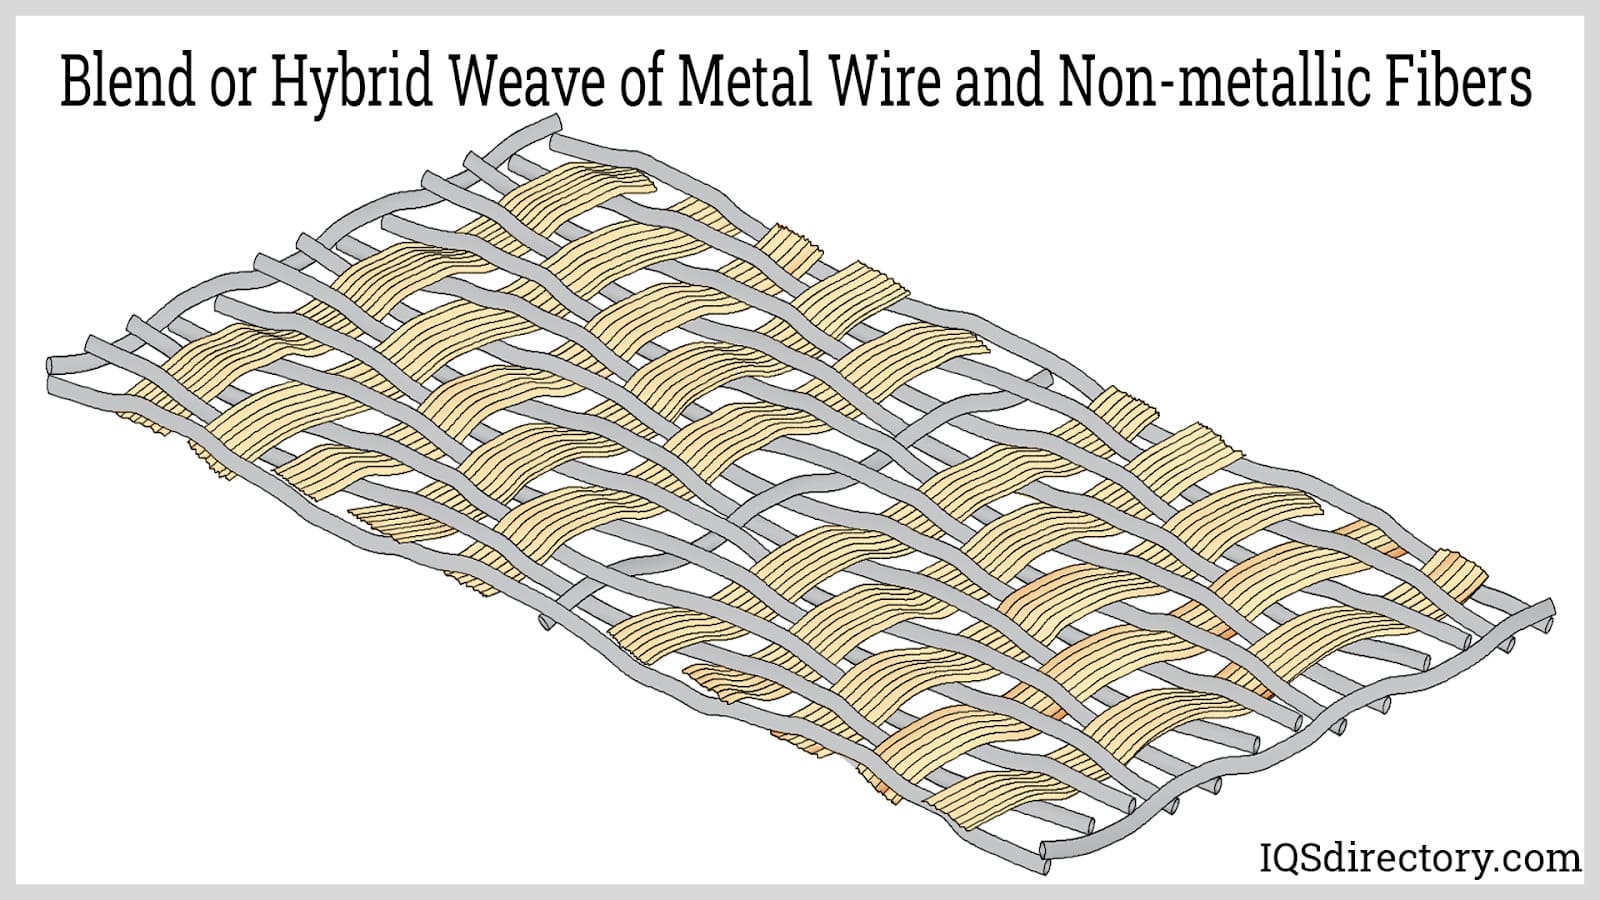 Blend or Hybrid Weave of Metal Wire and Non-metallic Fibers